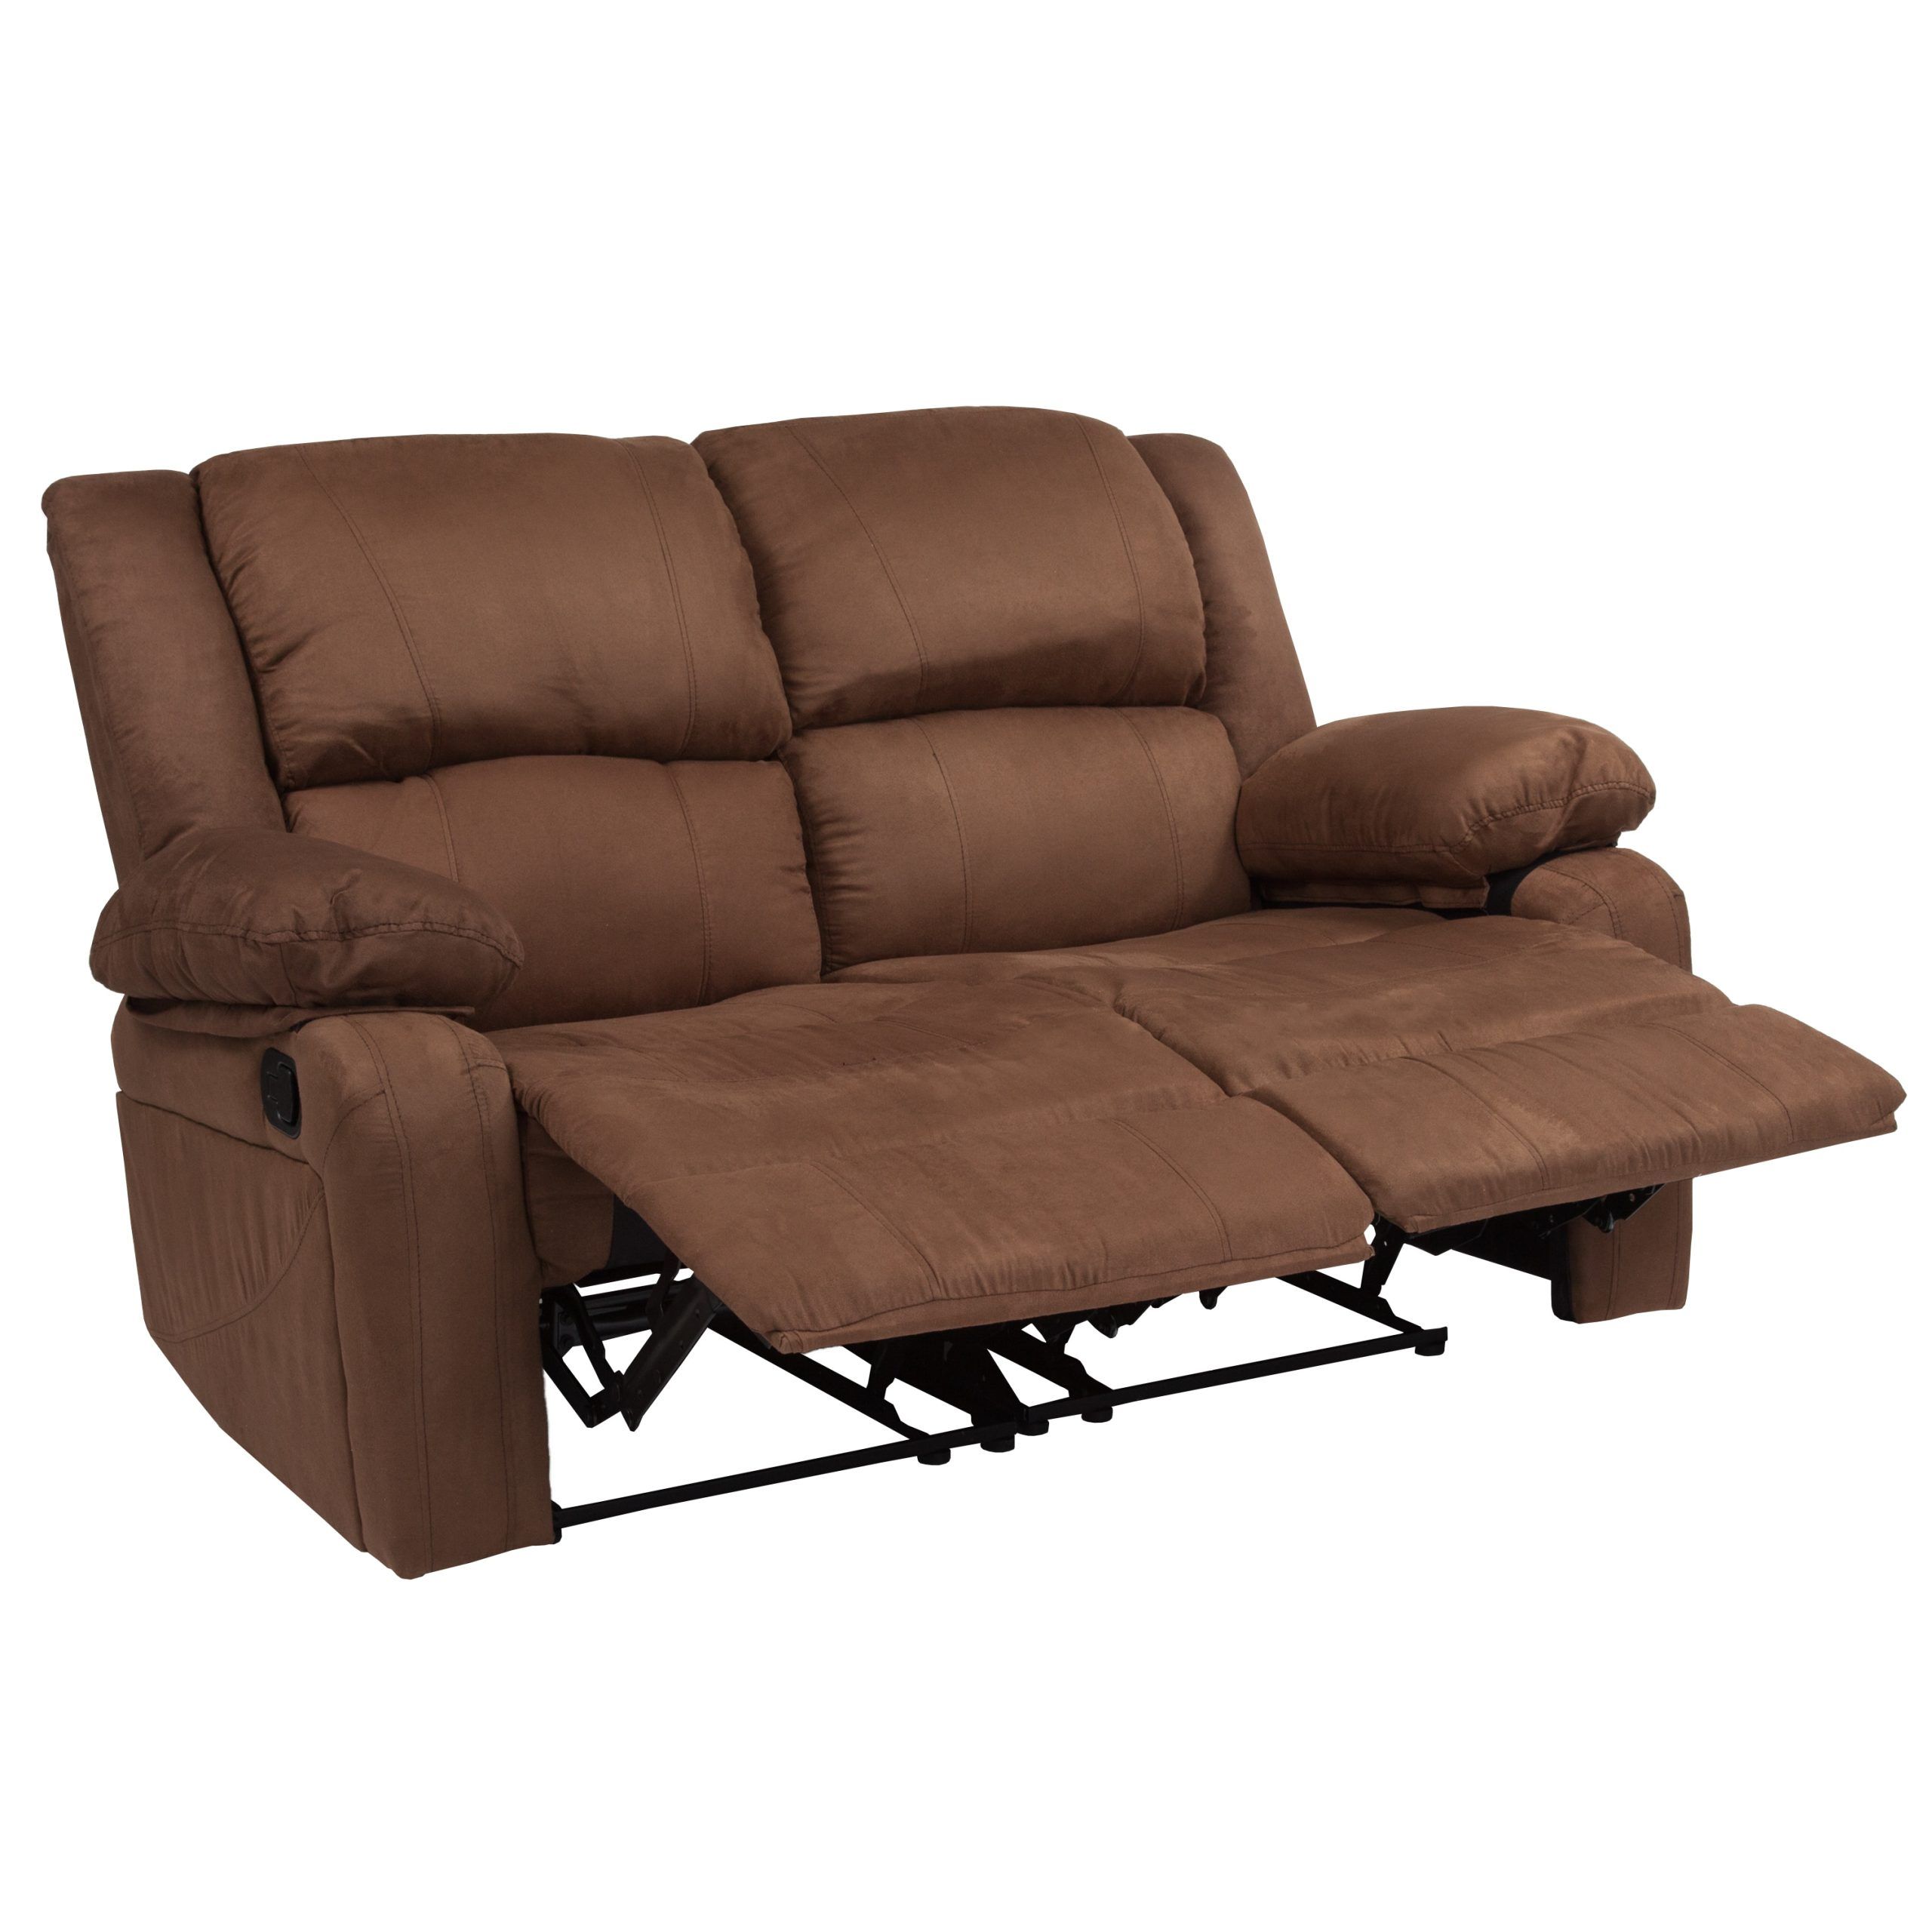 Flash Furniture Harmony Series 56 In Modern Chocolate Brown Microfiber 2 Seater  Reclining Loveseat In The Couches, Sofas & Loveseats Department At Lowes Intended For 2 Tone Chocolate Microfiber Sofas (View 8 of 15)